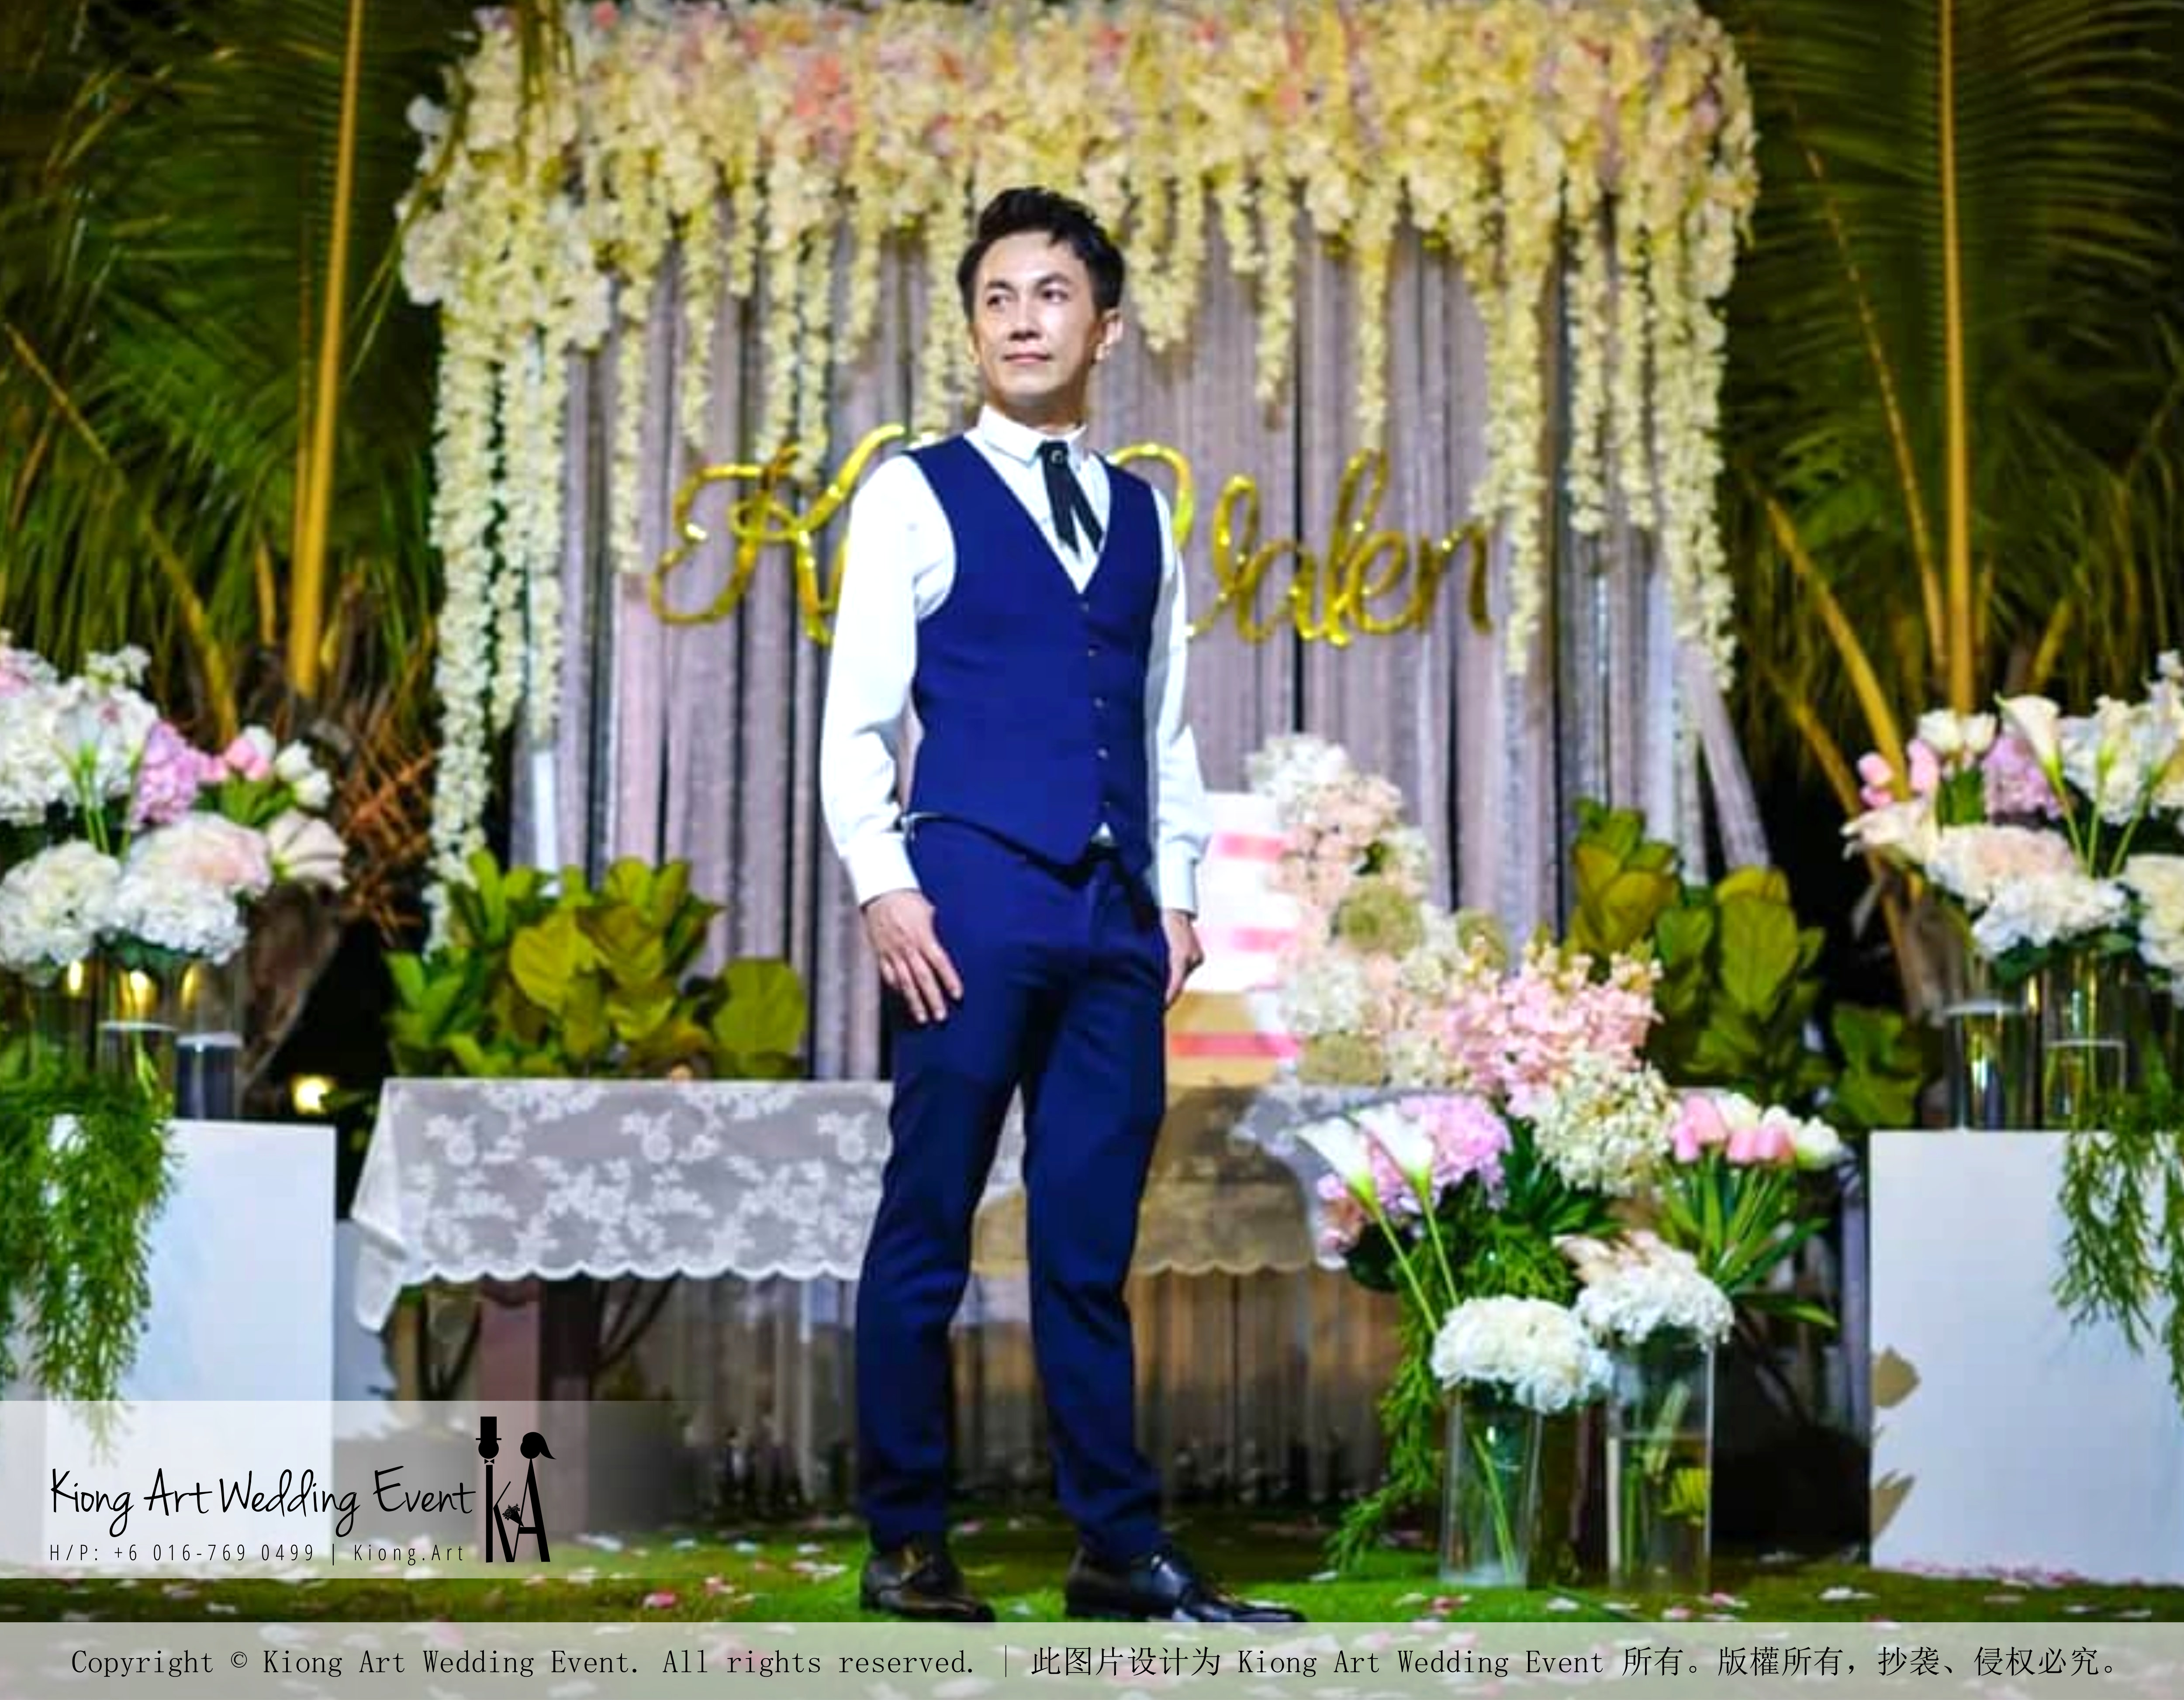 Kiong Art Wedding Event Kuala Lumpur Malaysia Wedding Decoration One-stop Wedding Planning Warm Outdoor Romantic Style Theme Kluang Container Swimming Pool Homestay A07-A01-50